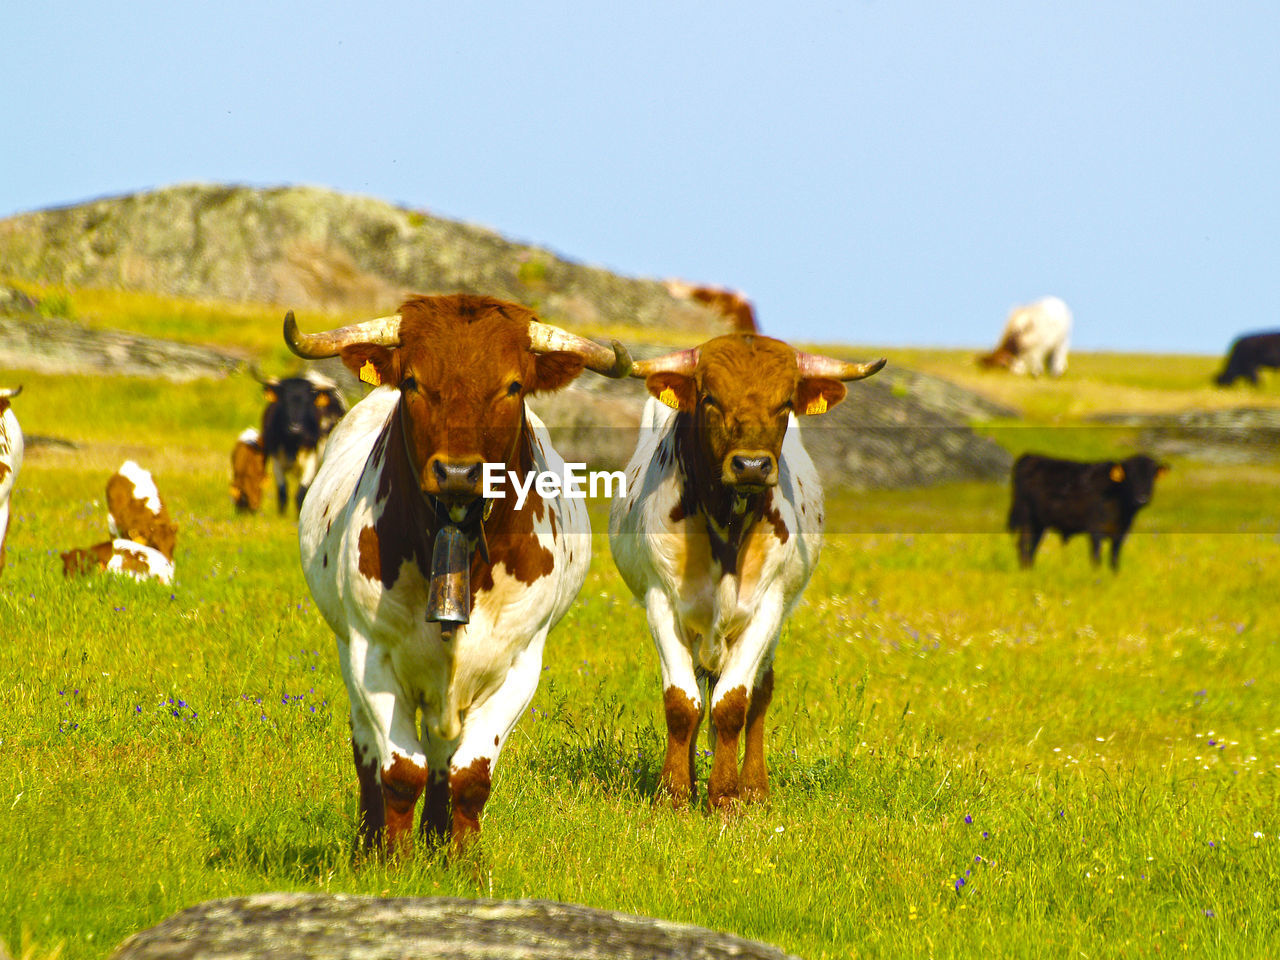 Cows with bells standing on grassy field